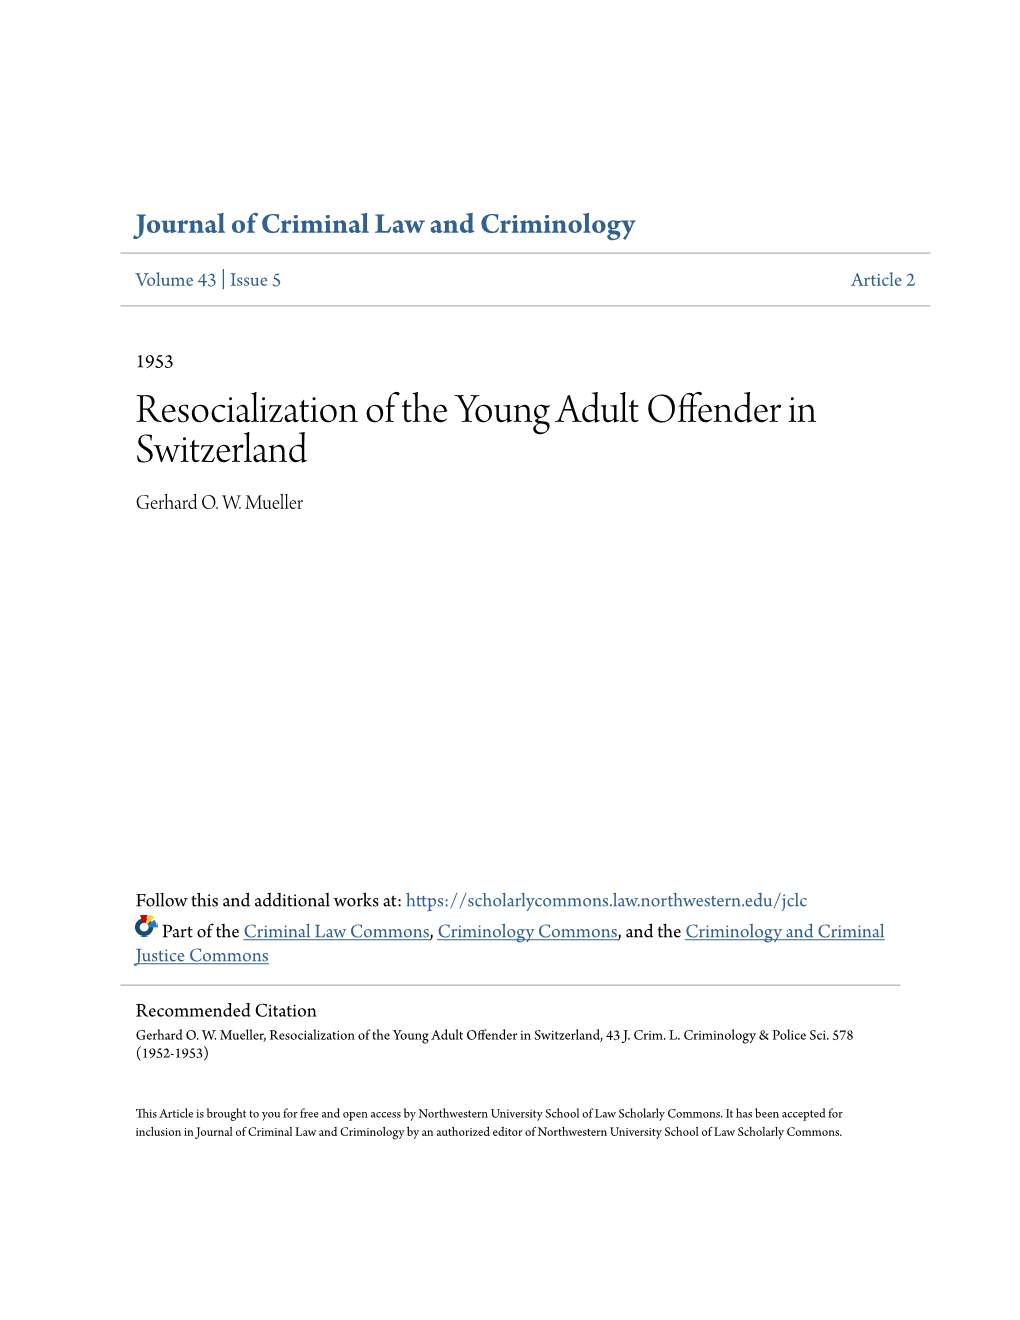 Resocialization of the Young Adult Offender in Switzerland Gerhard O